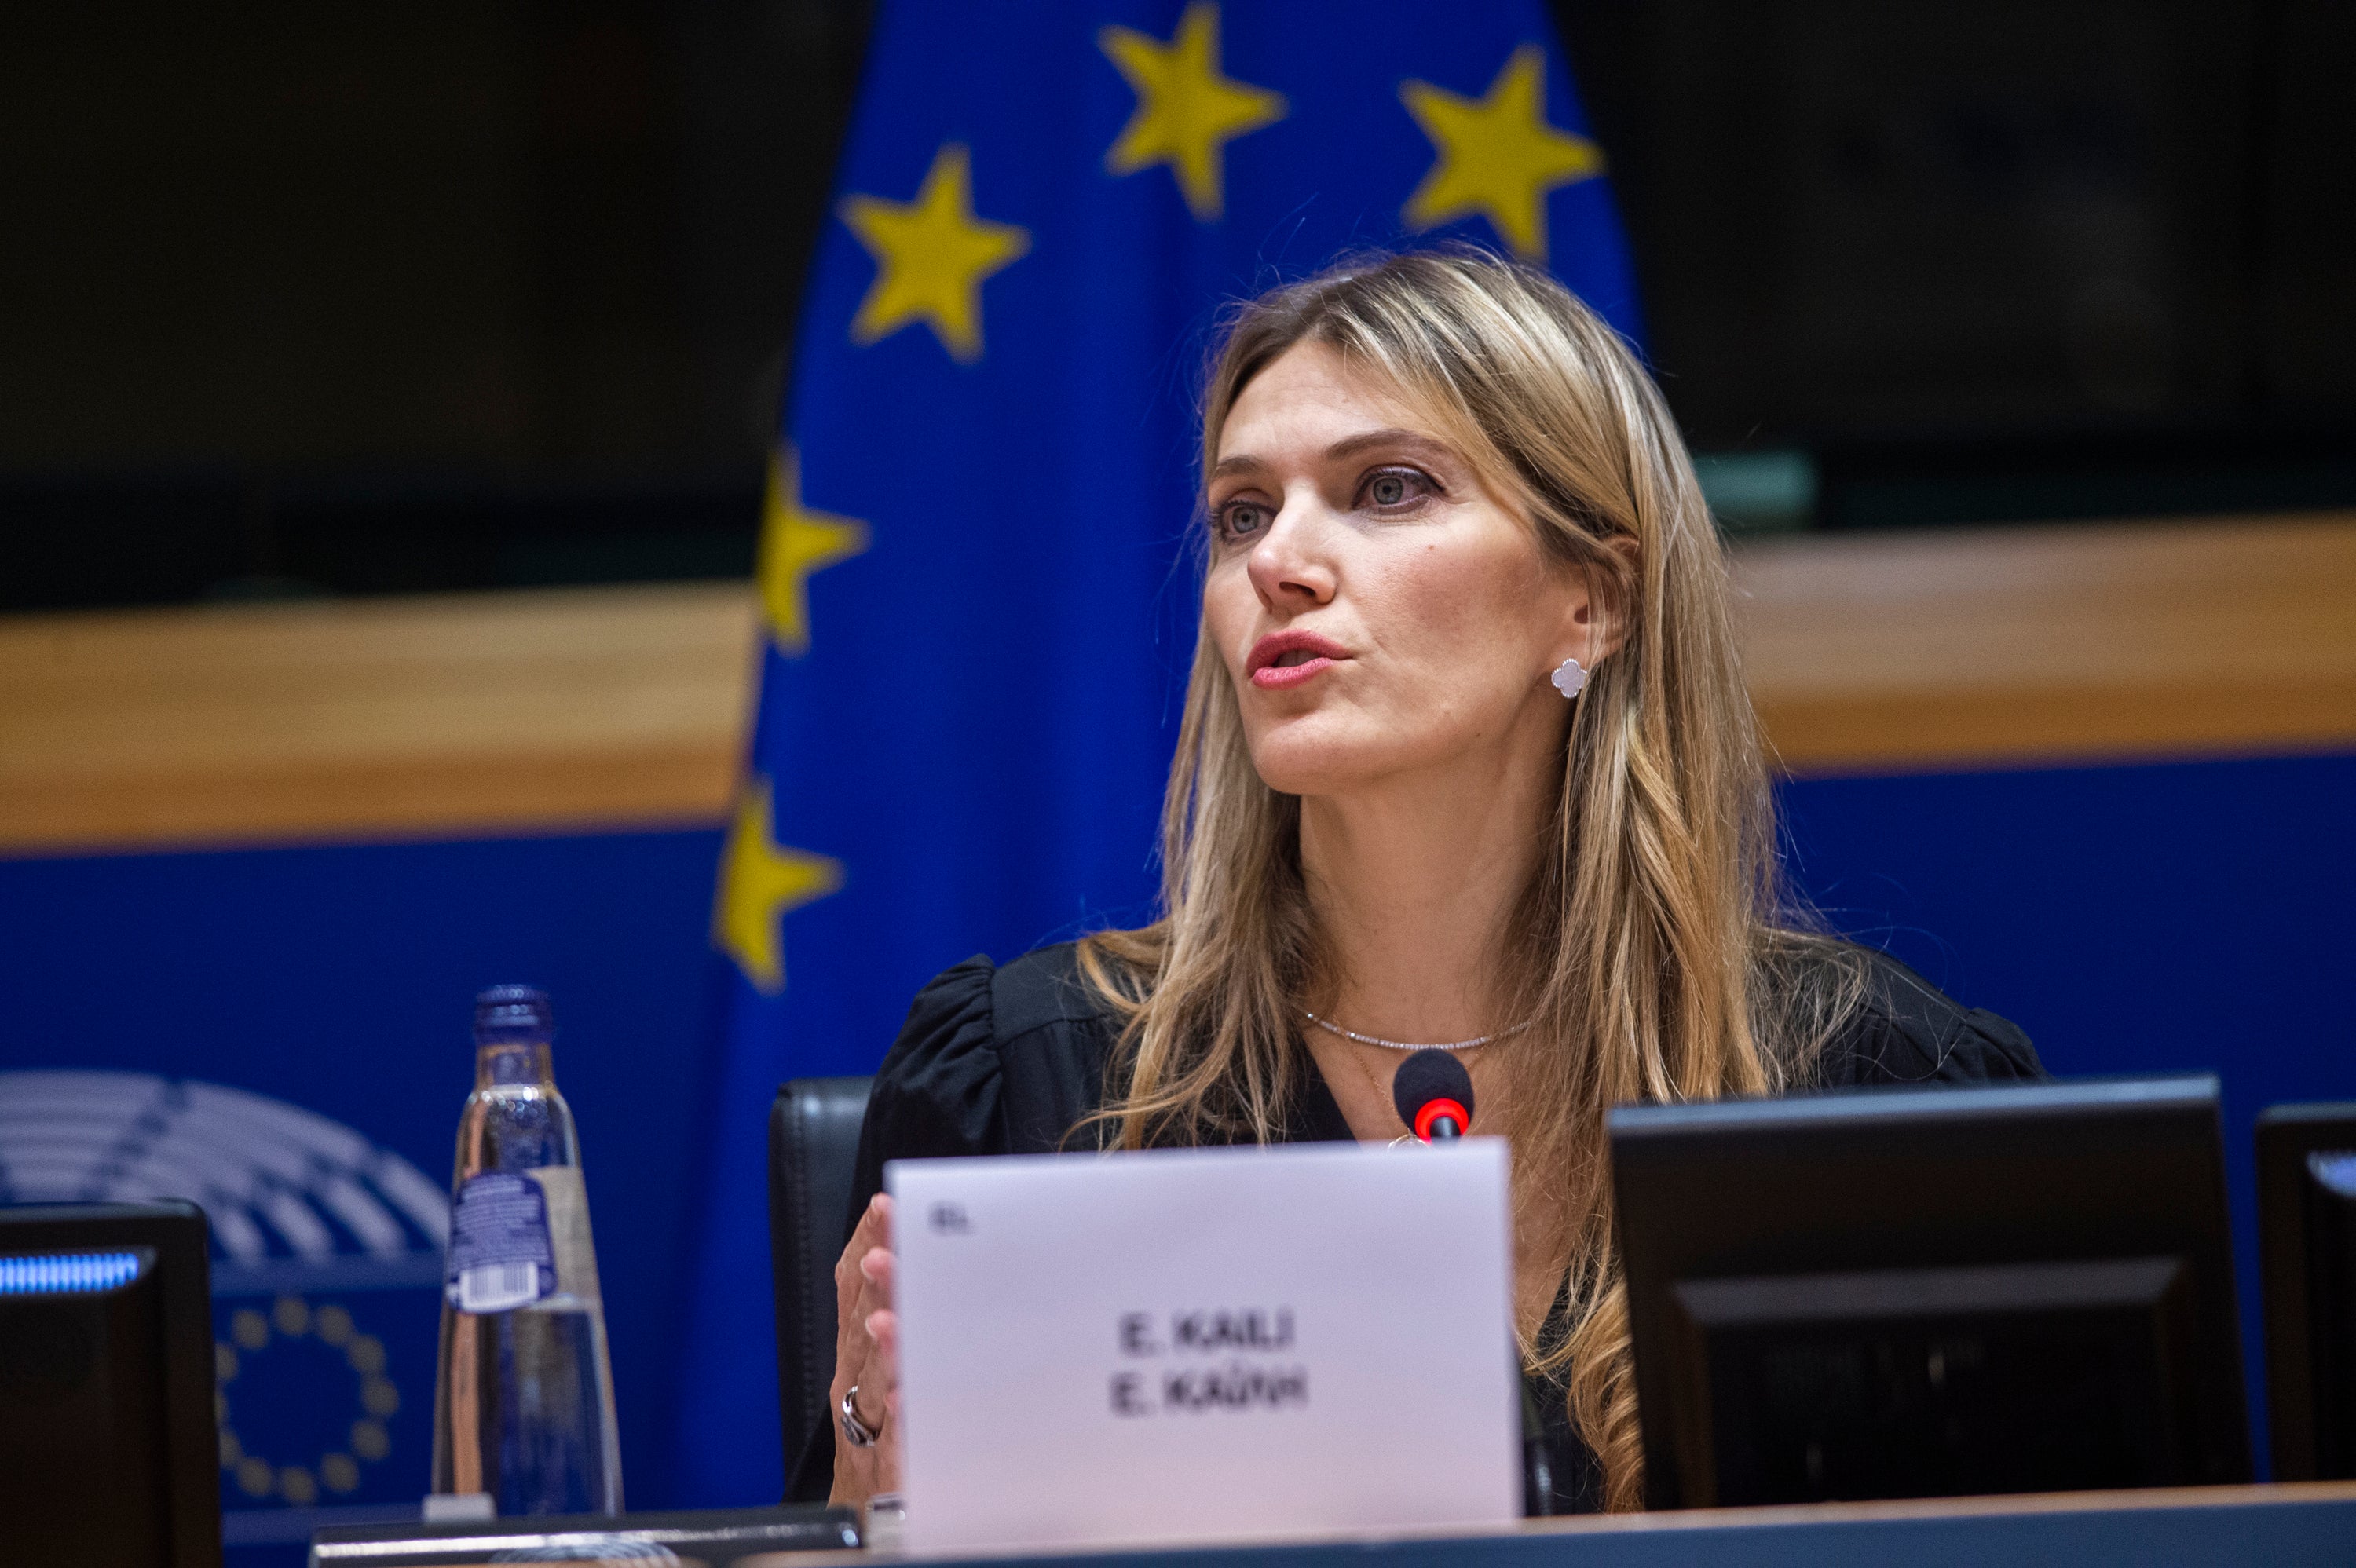 Eva Kaili, a vice-president of the European Parliament, was among those arrested